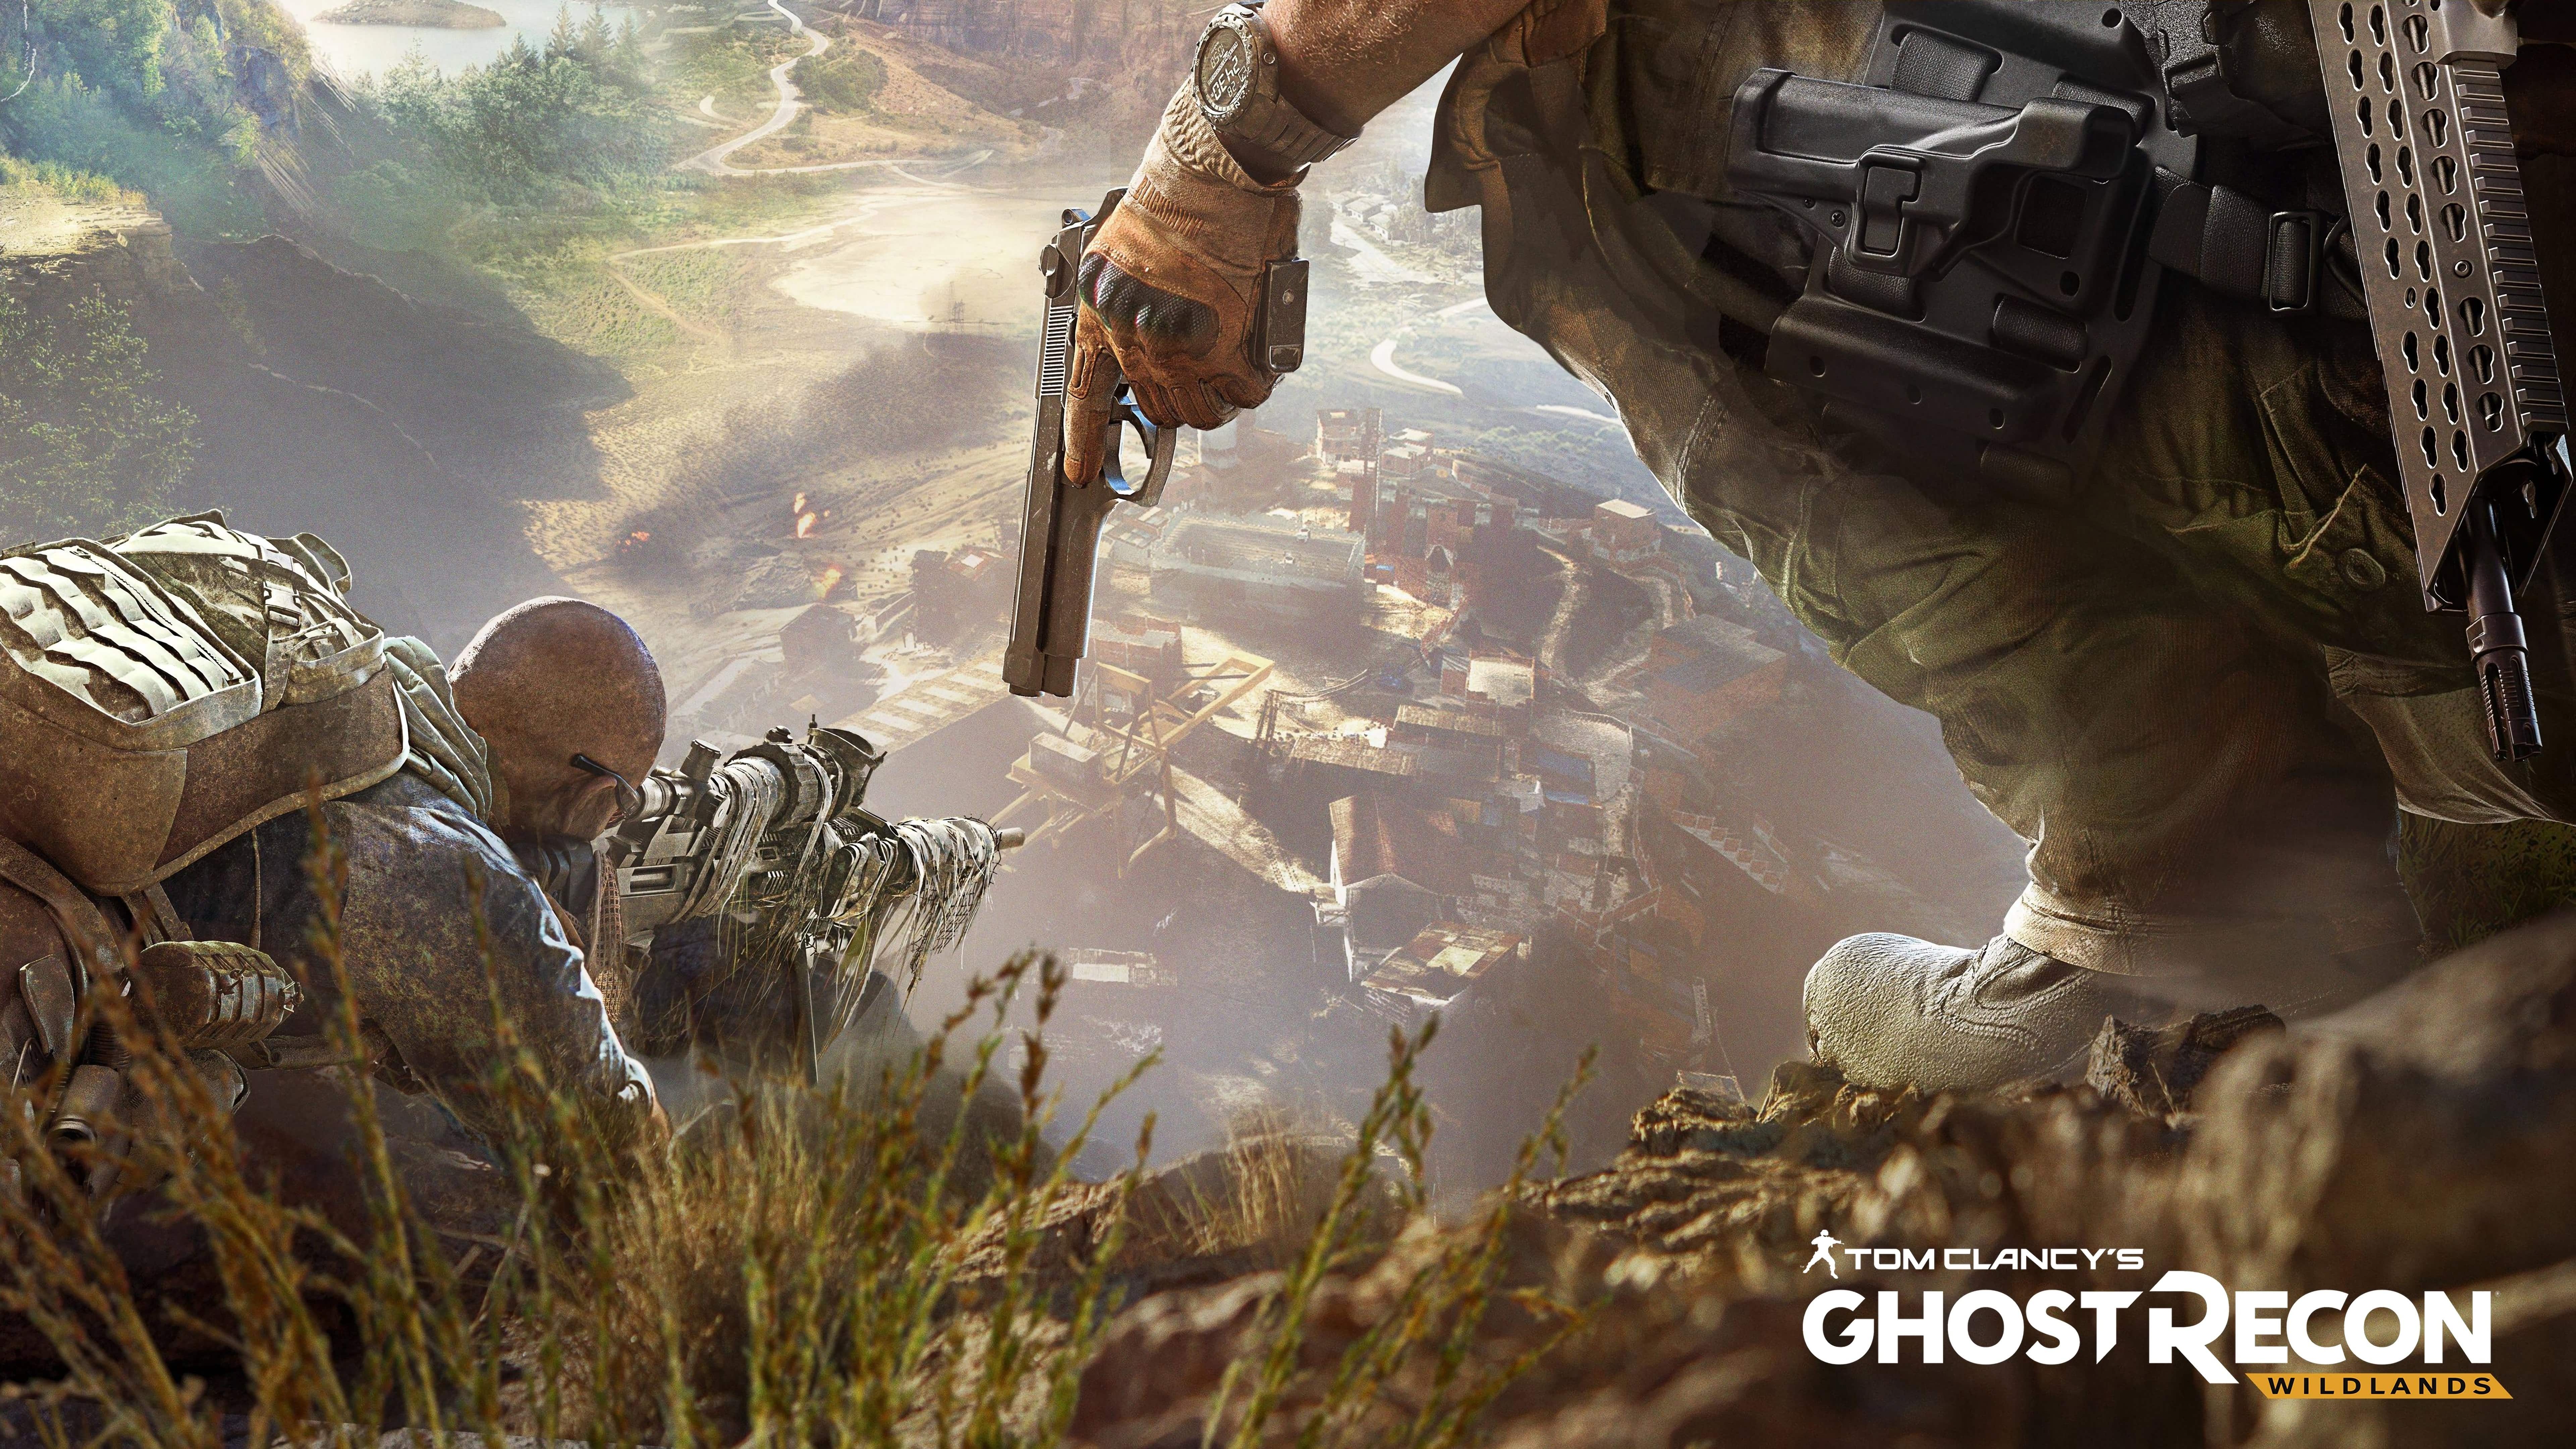 ghost recon wildlands download size xbox one